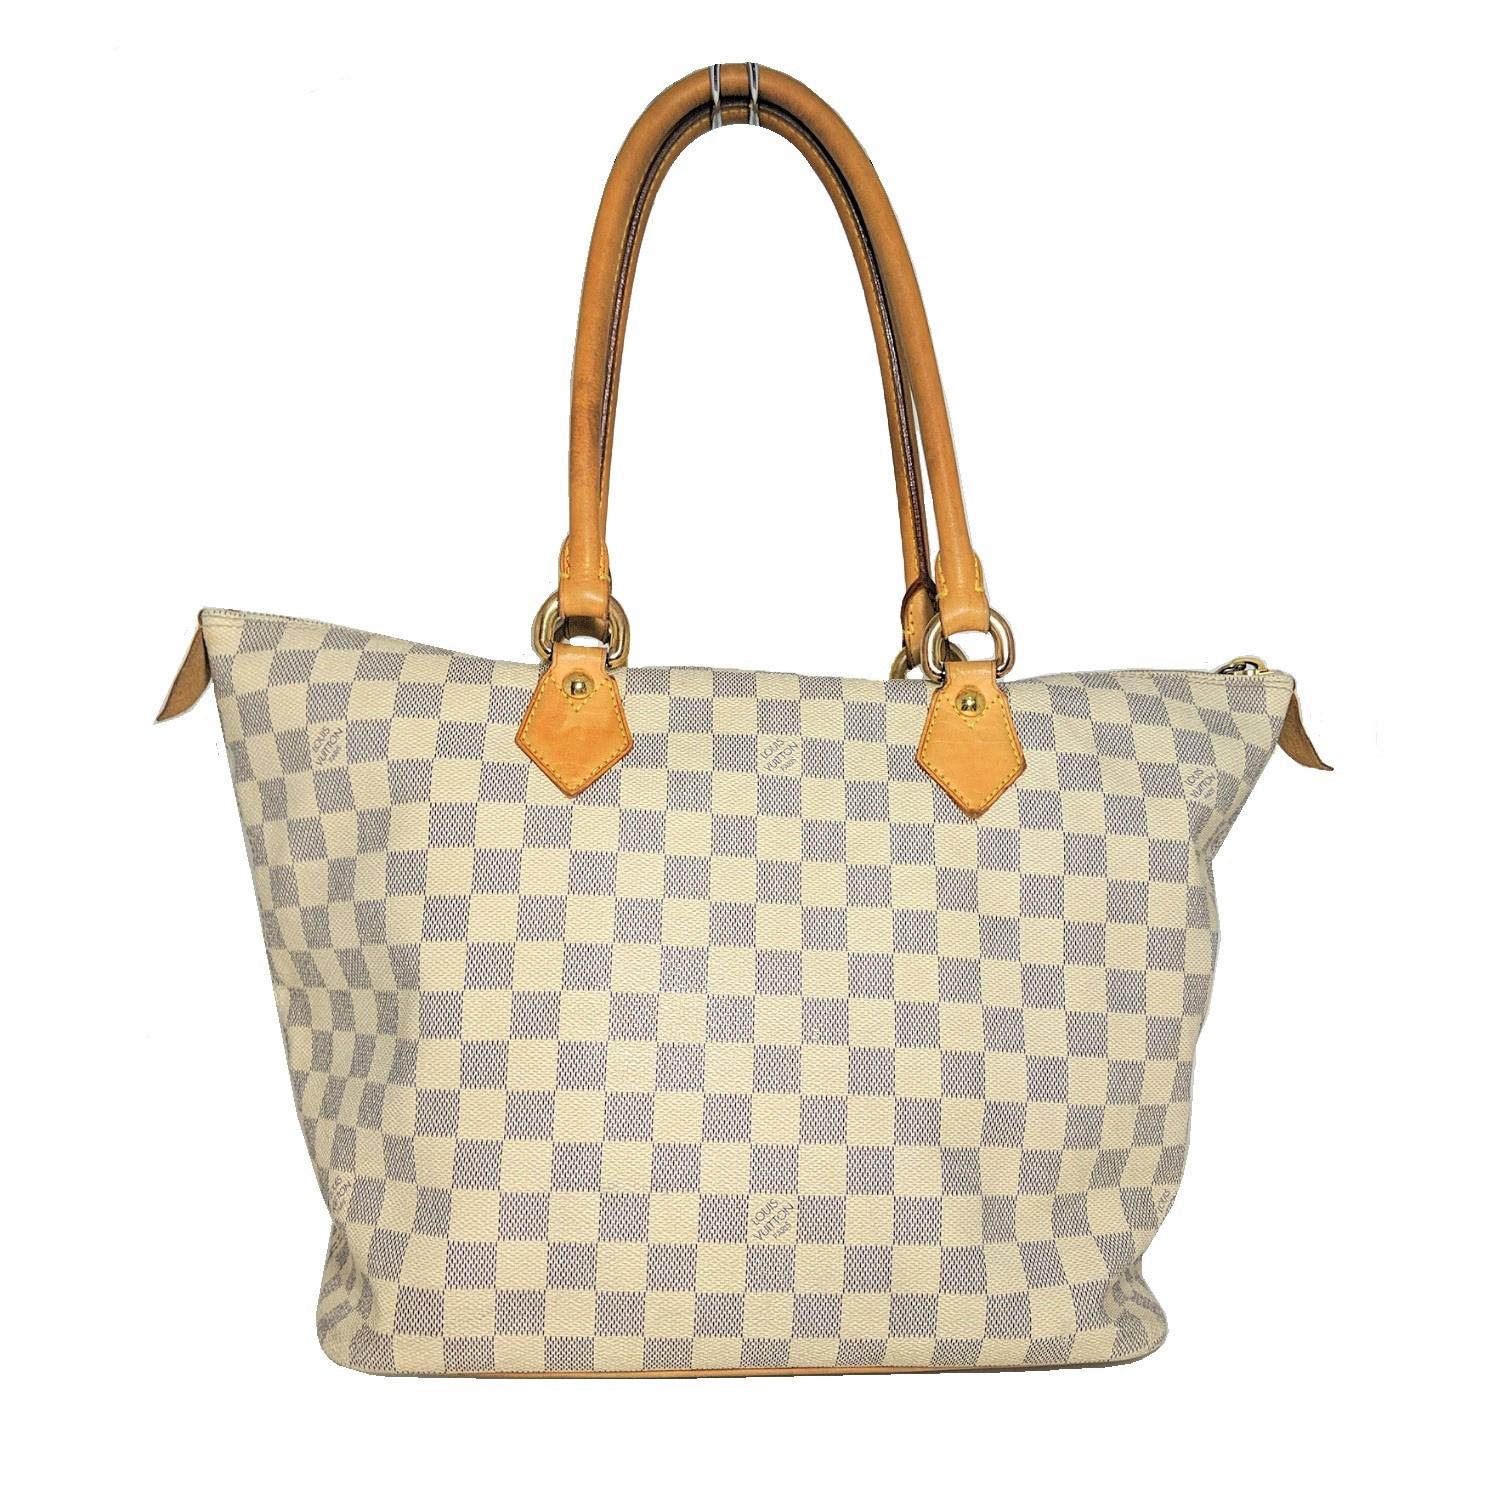 Creme and navy Damier Azur coated canvas Louis Vuitton Azur Saleya MM tote with brass hardware, dual rolled shoulder straps, tan Vachetta leather trim, beige Alcantara lining, dual slit pockets at interior wall and zip closure at top. Retail